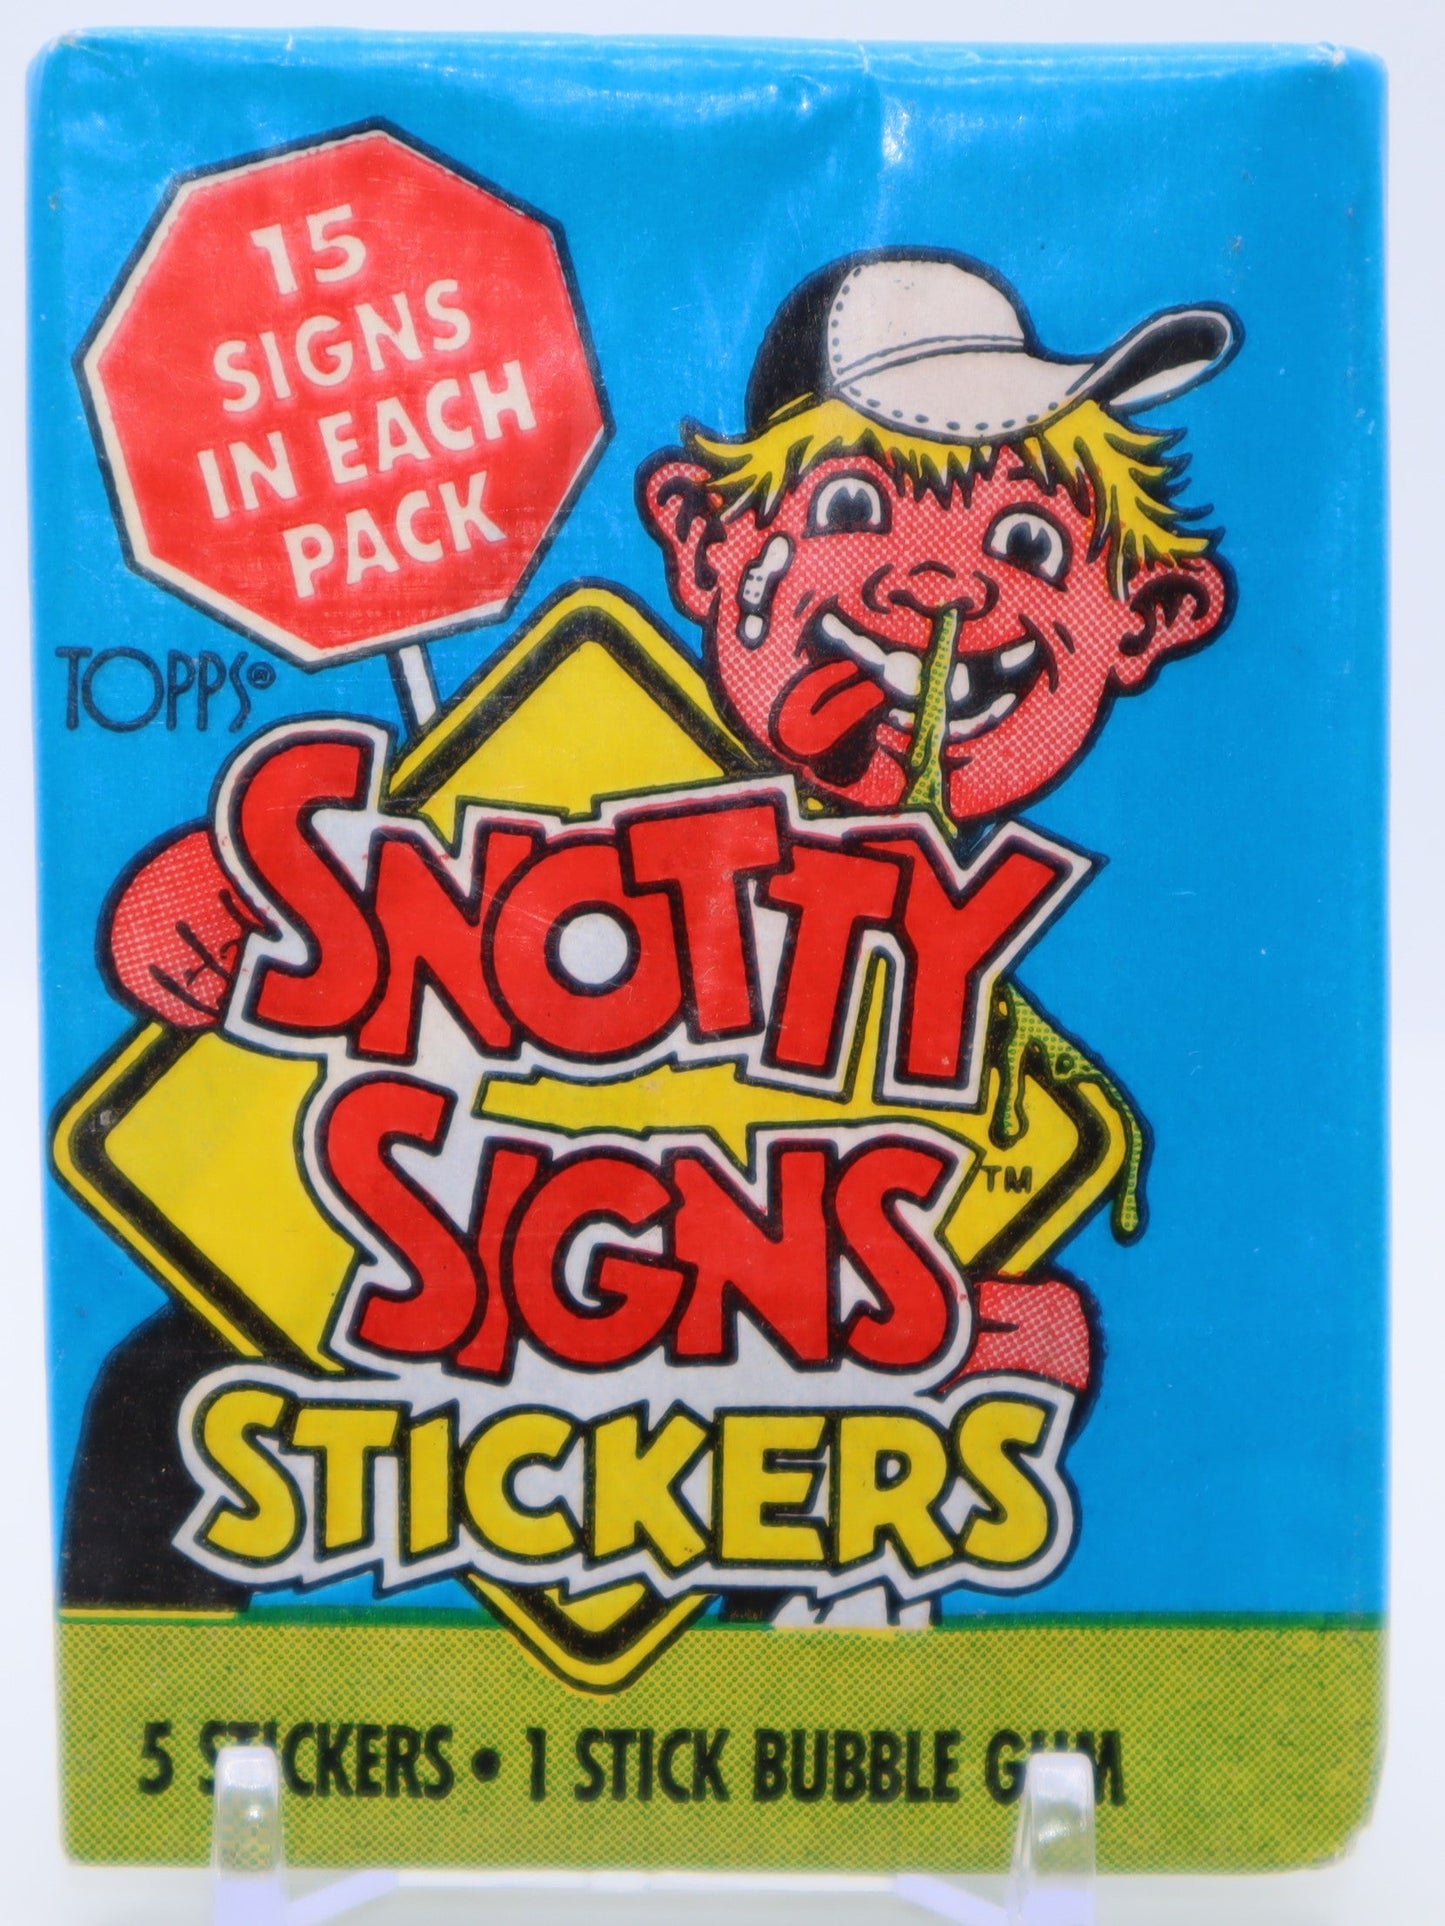 1986 Topps Snotty Signs Stickers Trading Cards Wax Pack - Collectibles